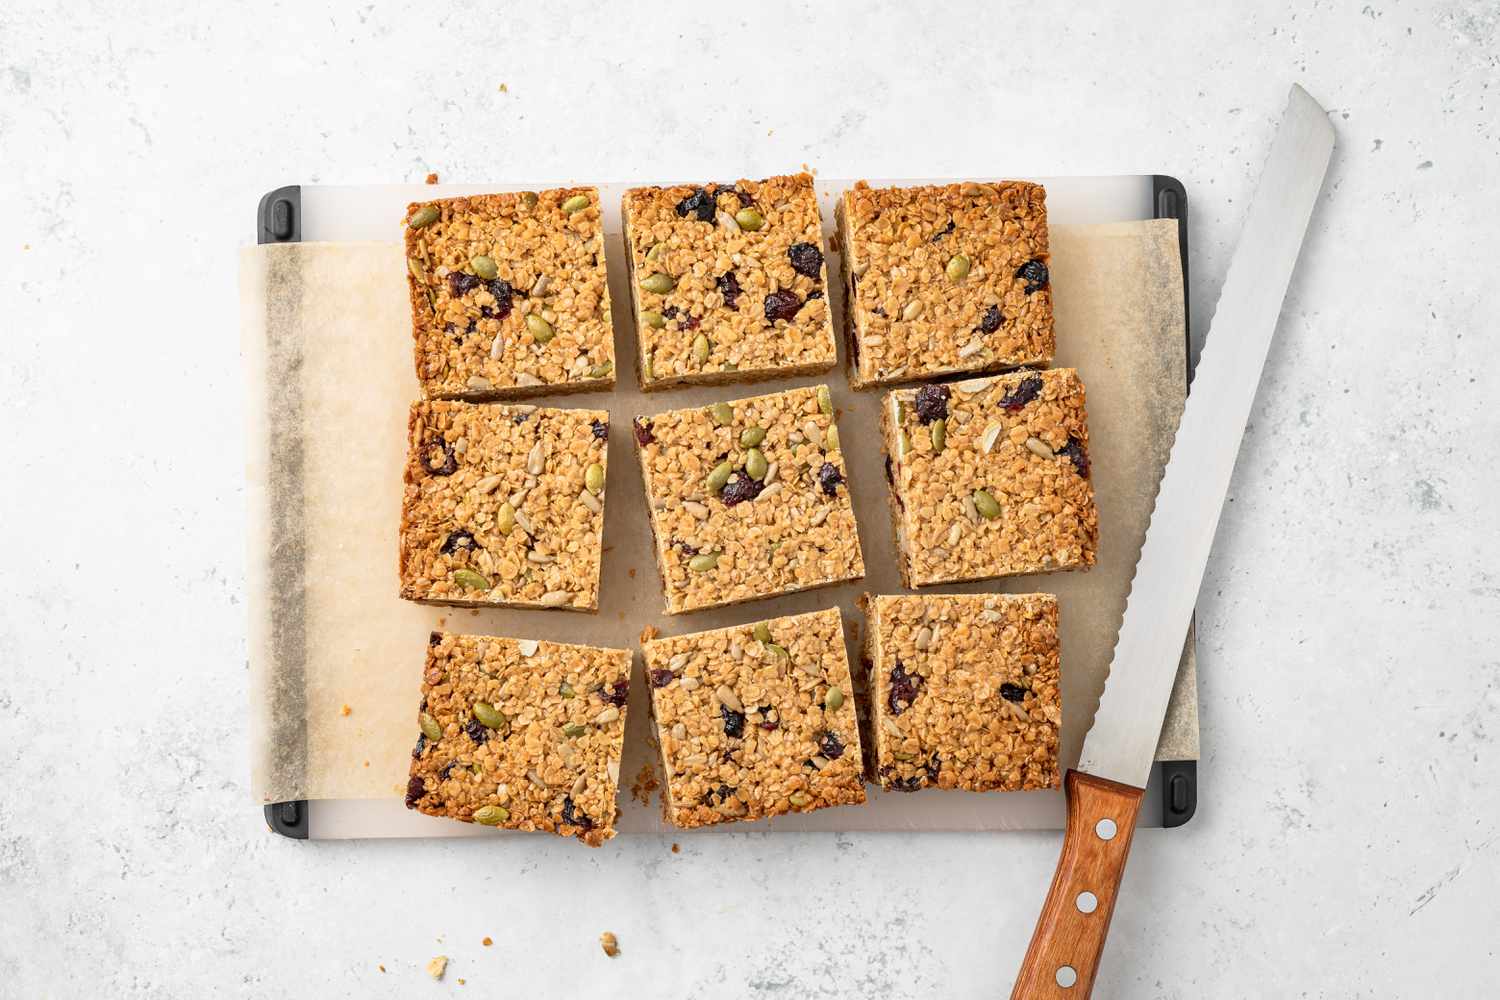 Sliced Flapjacks on a Parchment Paper Covered Cutting Board With a Bread Knife